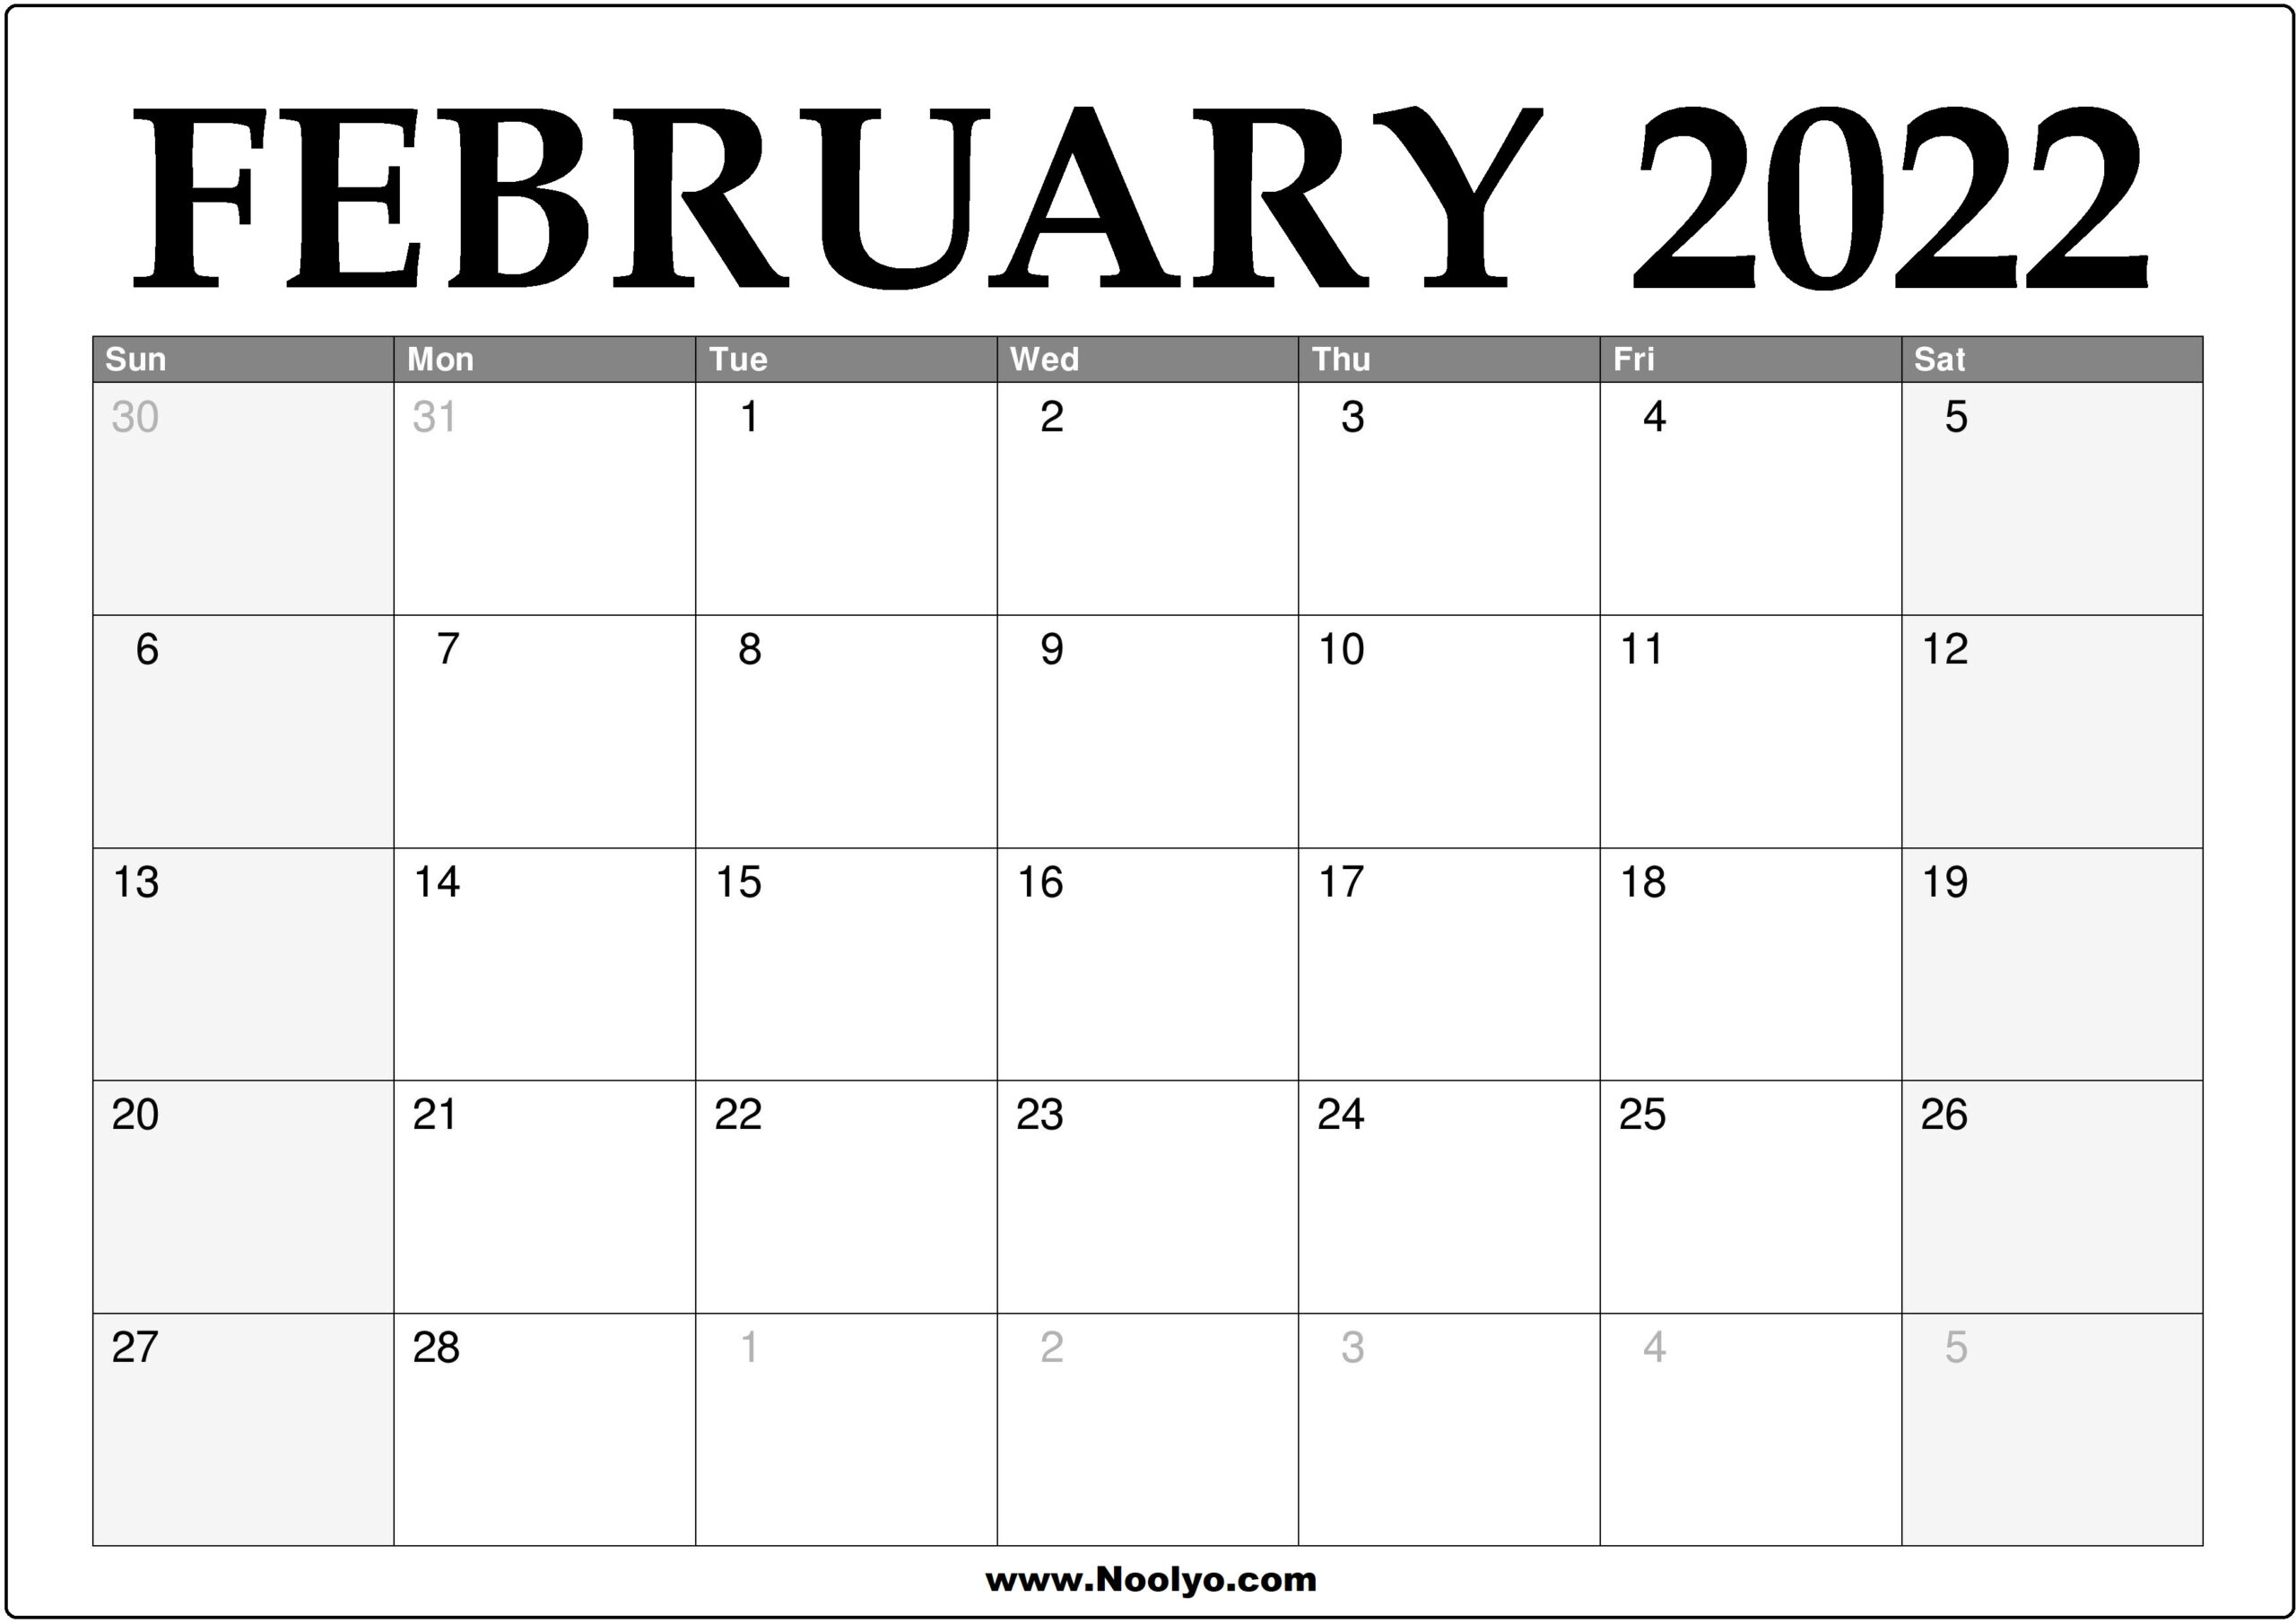 Collect 2022 Calendar For February